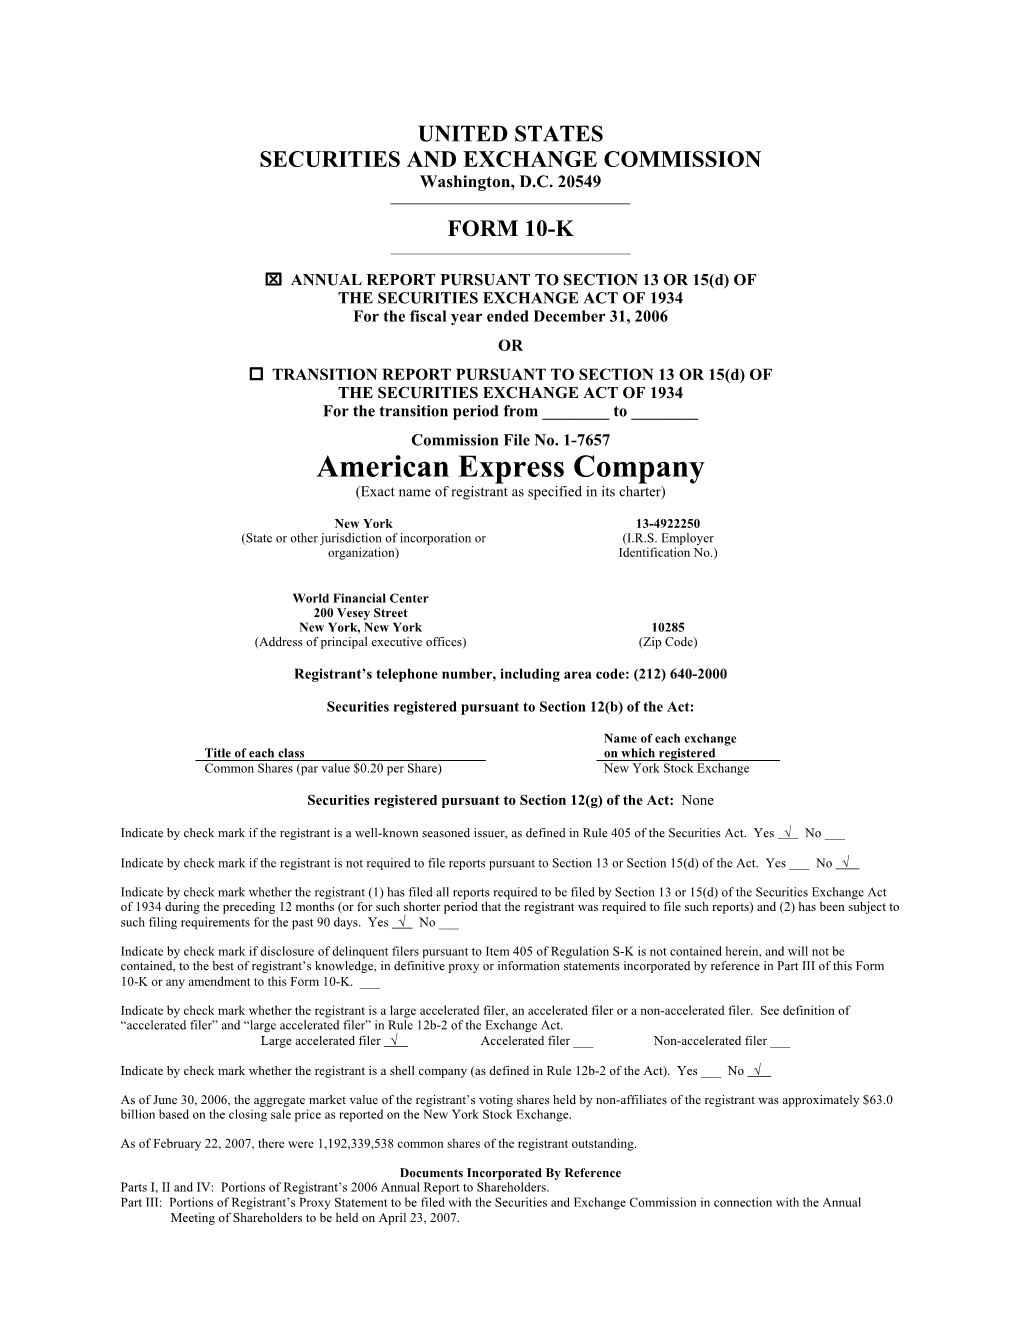 American Express Company (Exact Name of Registrant As Specified in Its Charter)